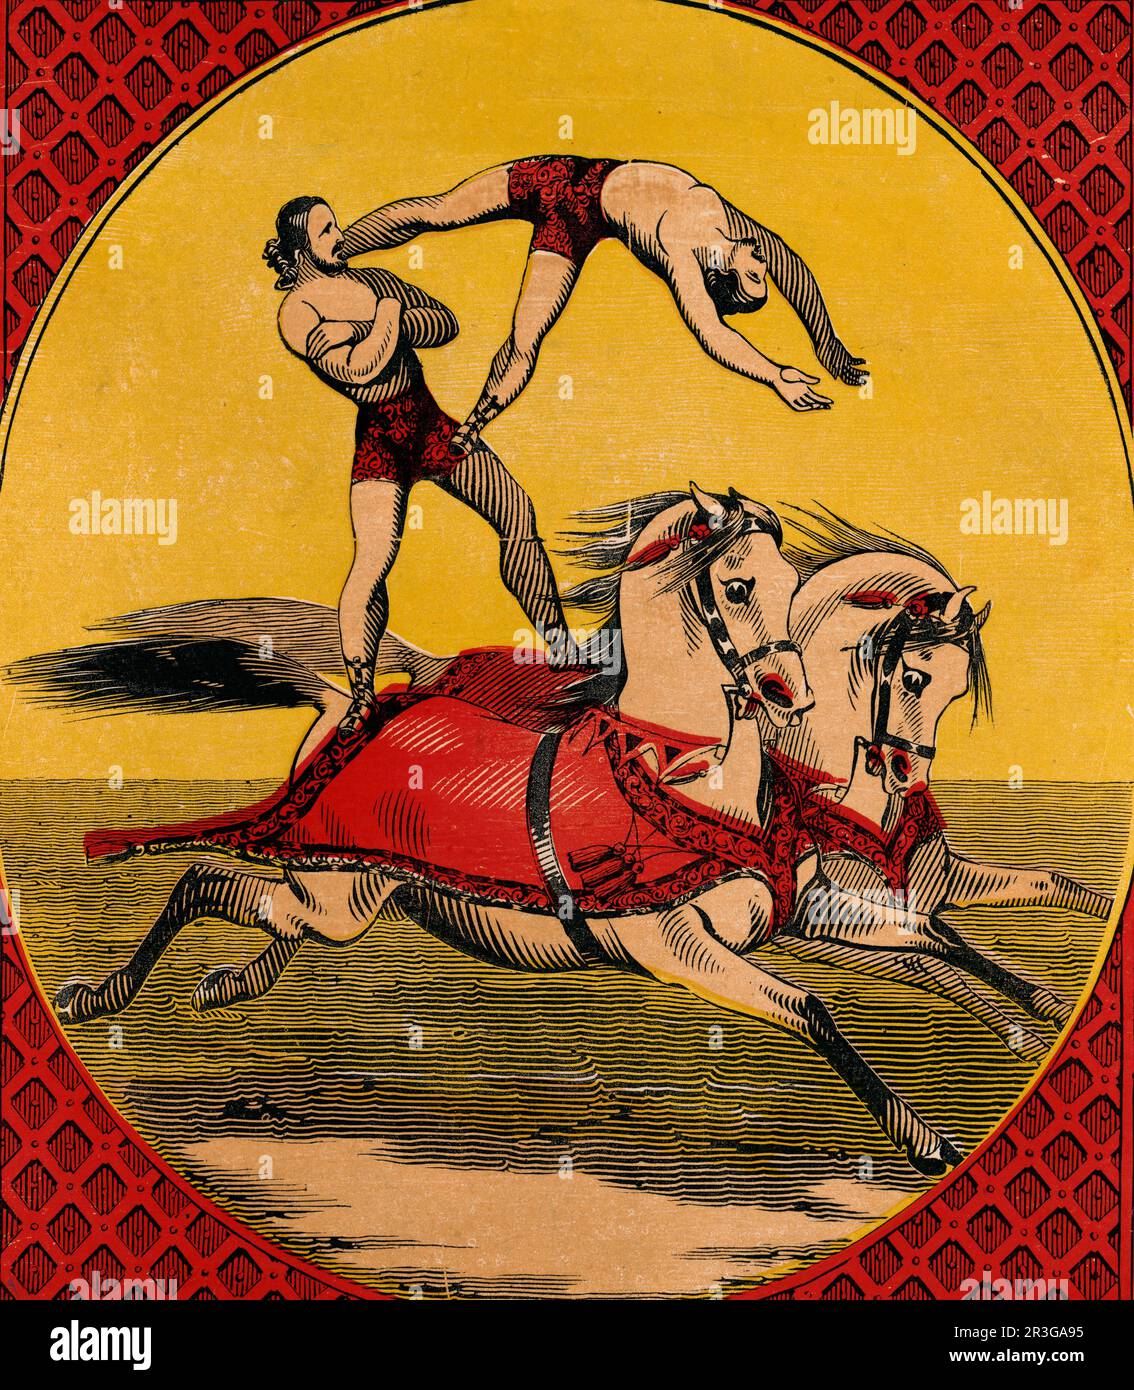 Vintage print of two male bareback riders perfoming stunts while balancing on the backs of two horses. Stock Photo